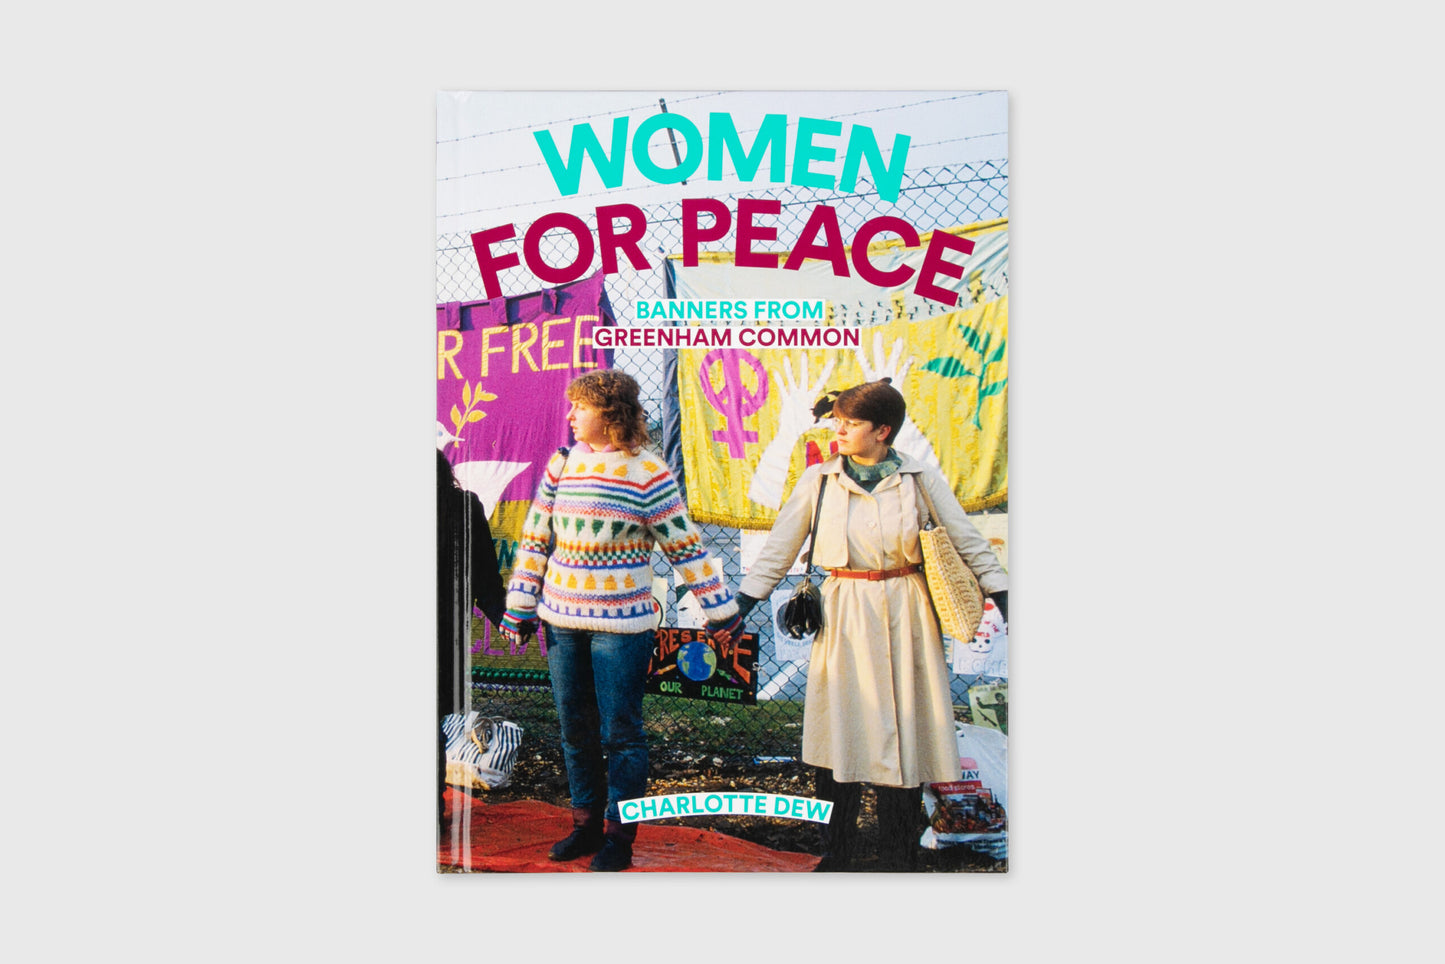 Women For Peace: Banners From Greenham Common